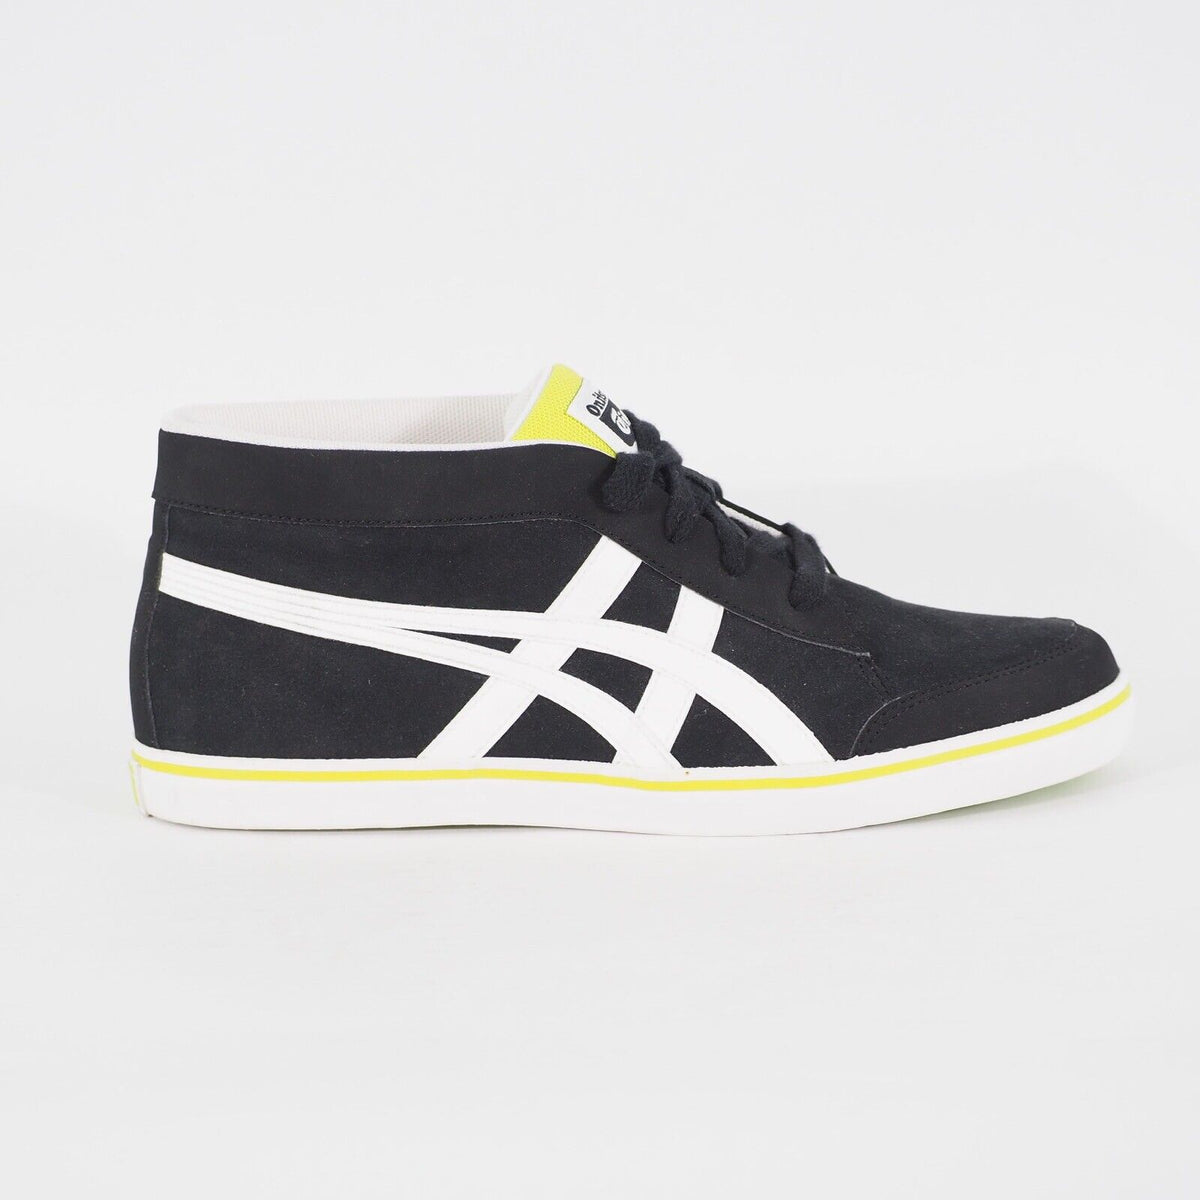 Adults Asics Onitsuka Tiger Renshi D3C4Y Black Casual Lace Up Walking Trainers